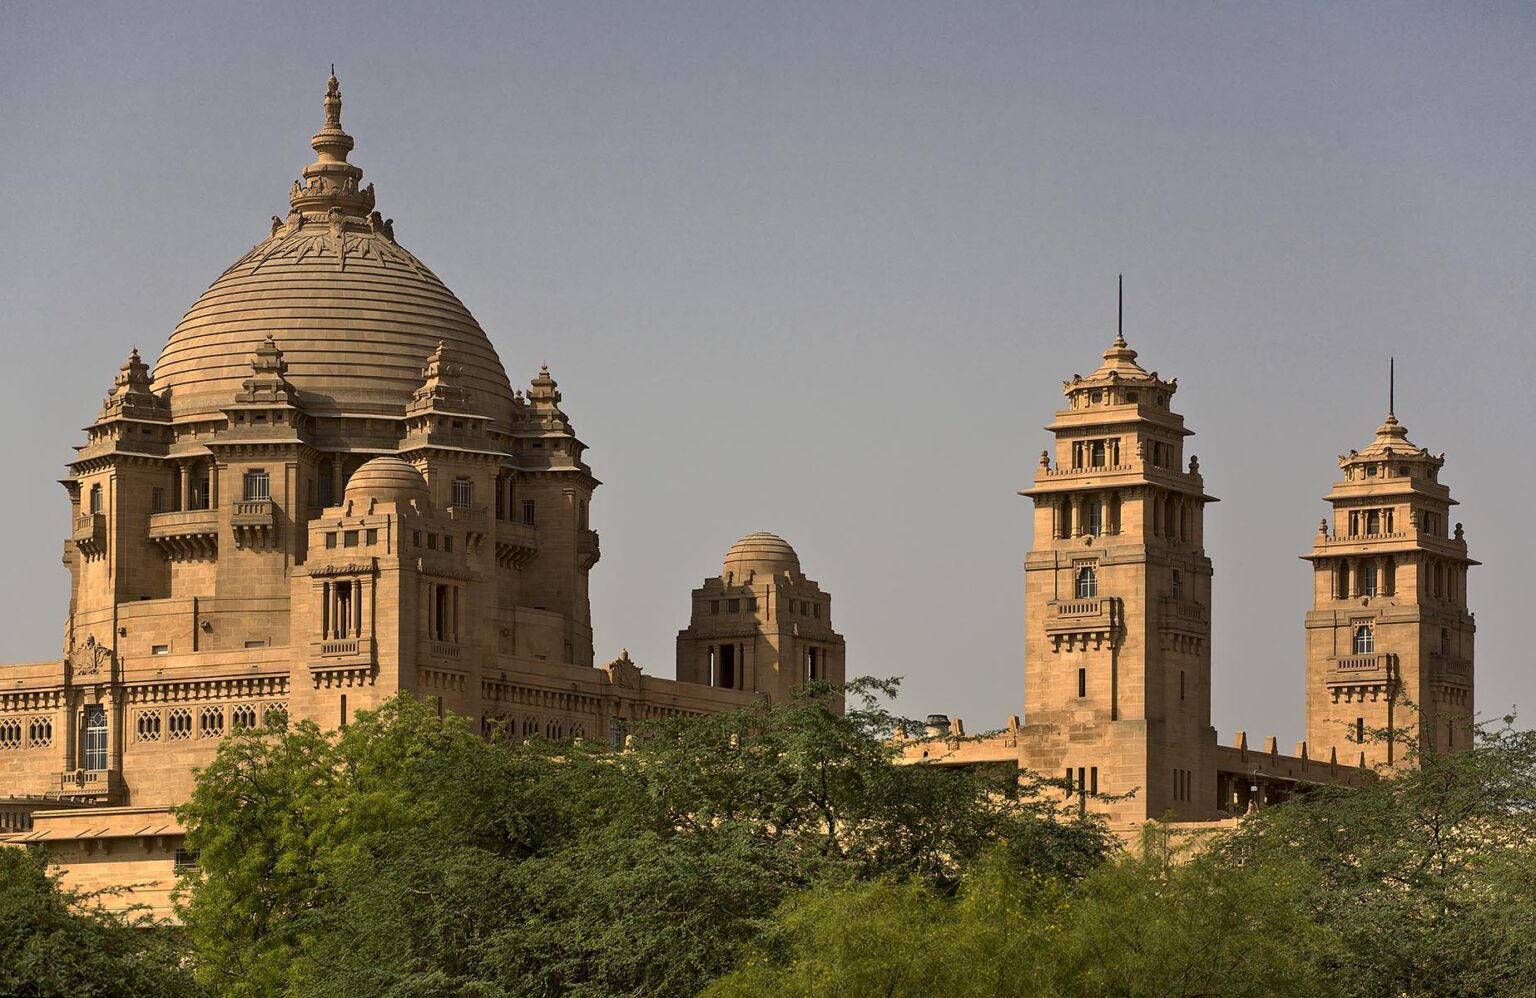 Exterior of UMAID BHAWAN PALACE made of chittar sandstone was built in 1929 and created work in a depressed time - JODHPUR, RAJASTHAN, INDIA